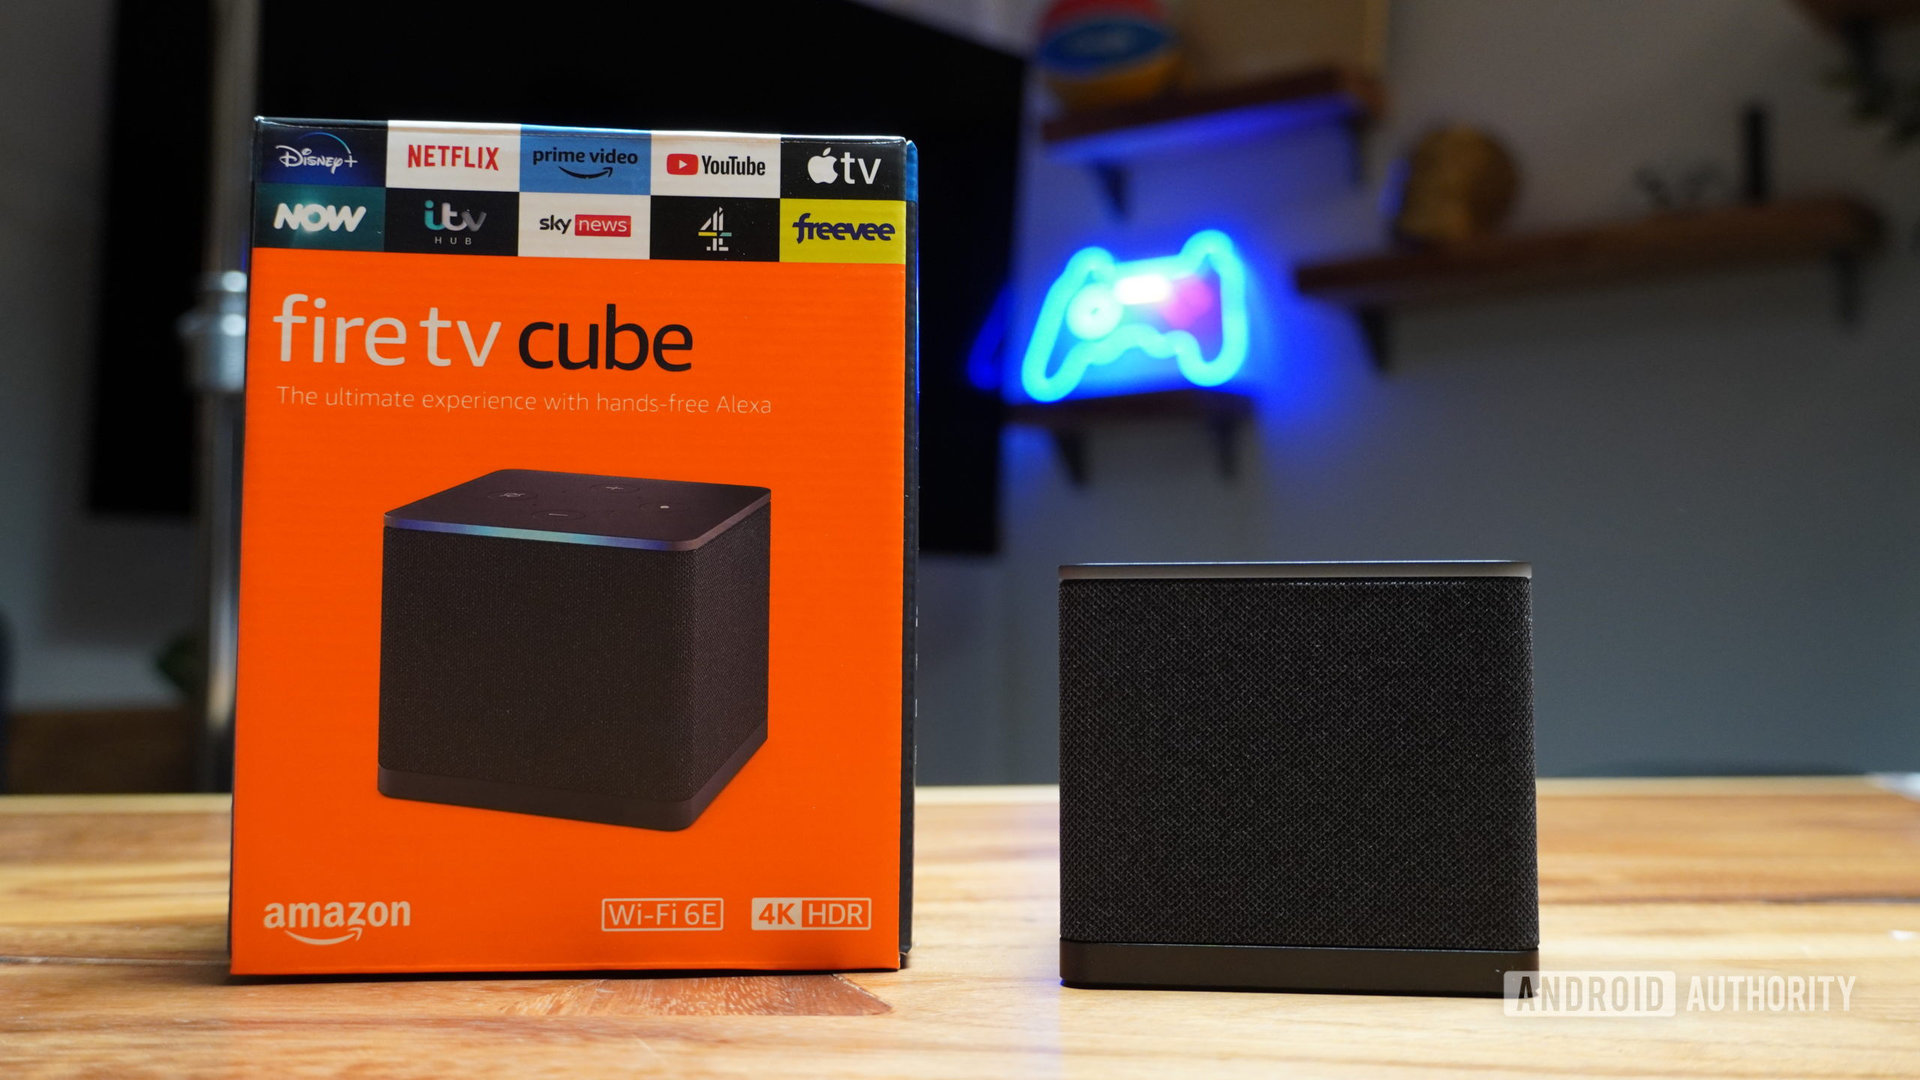 Amazon Fire TV Cube (3rd gen) with box